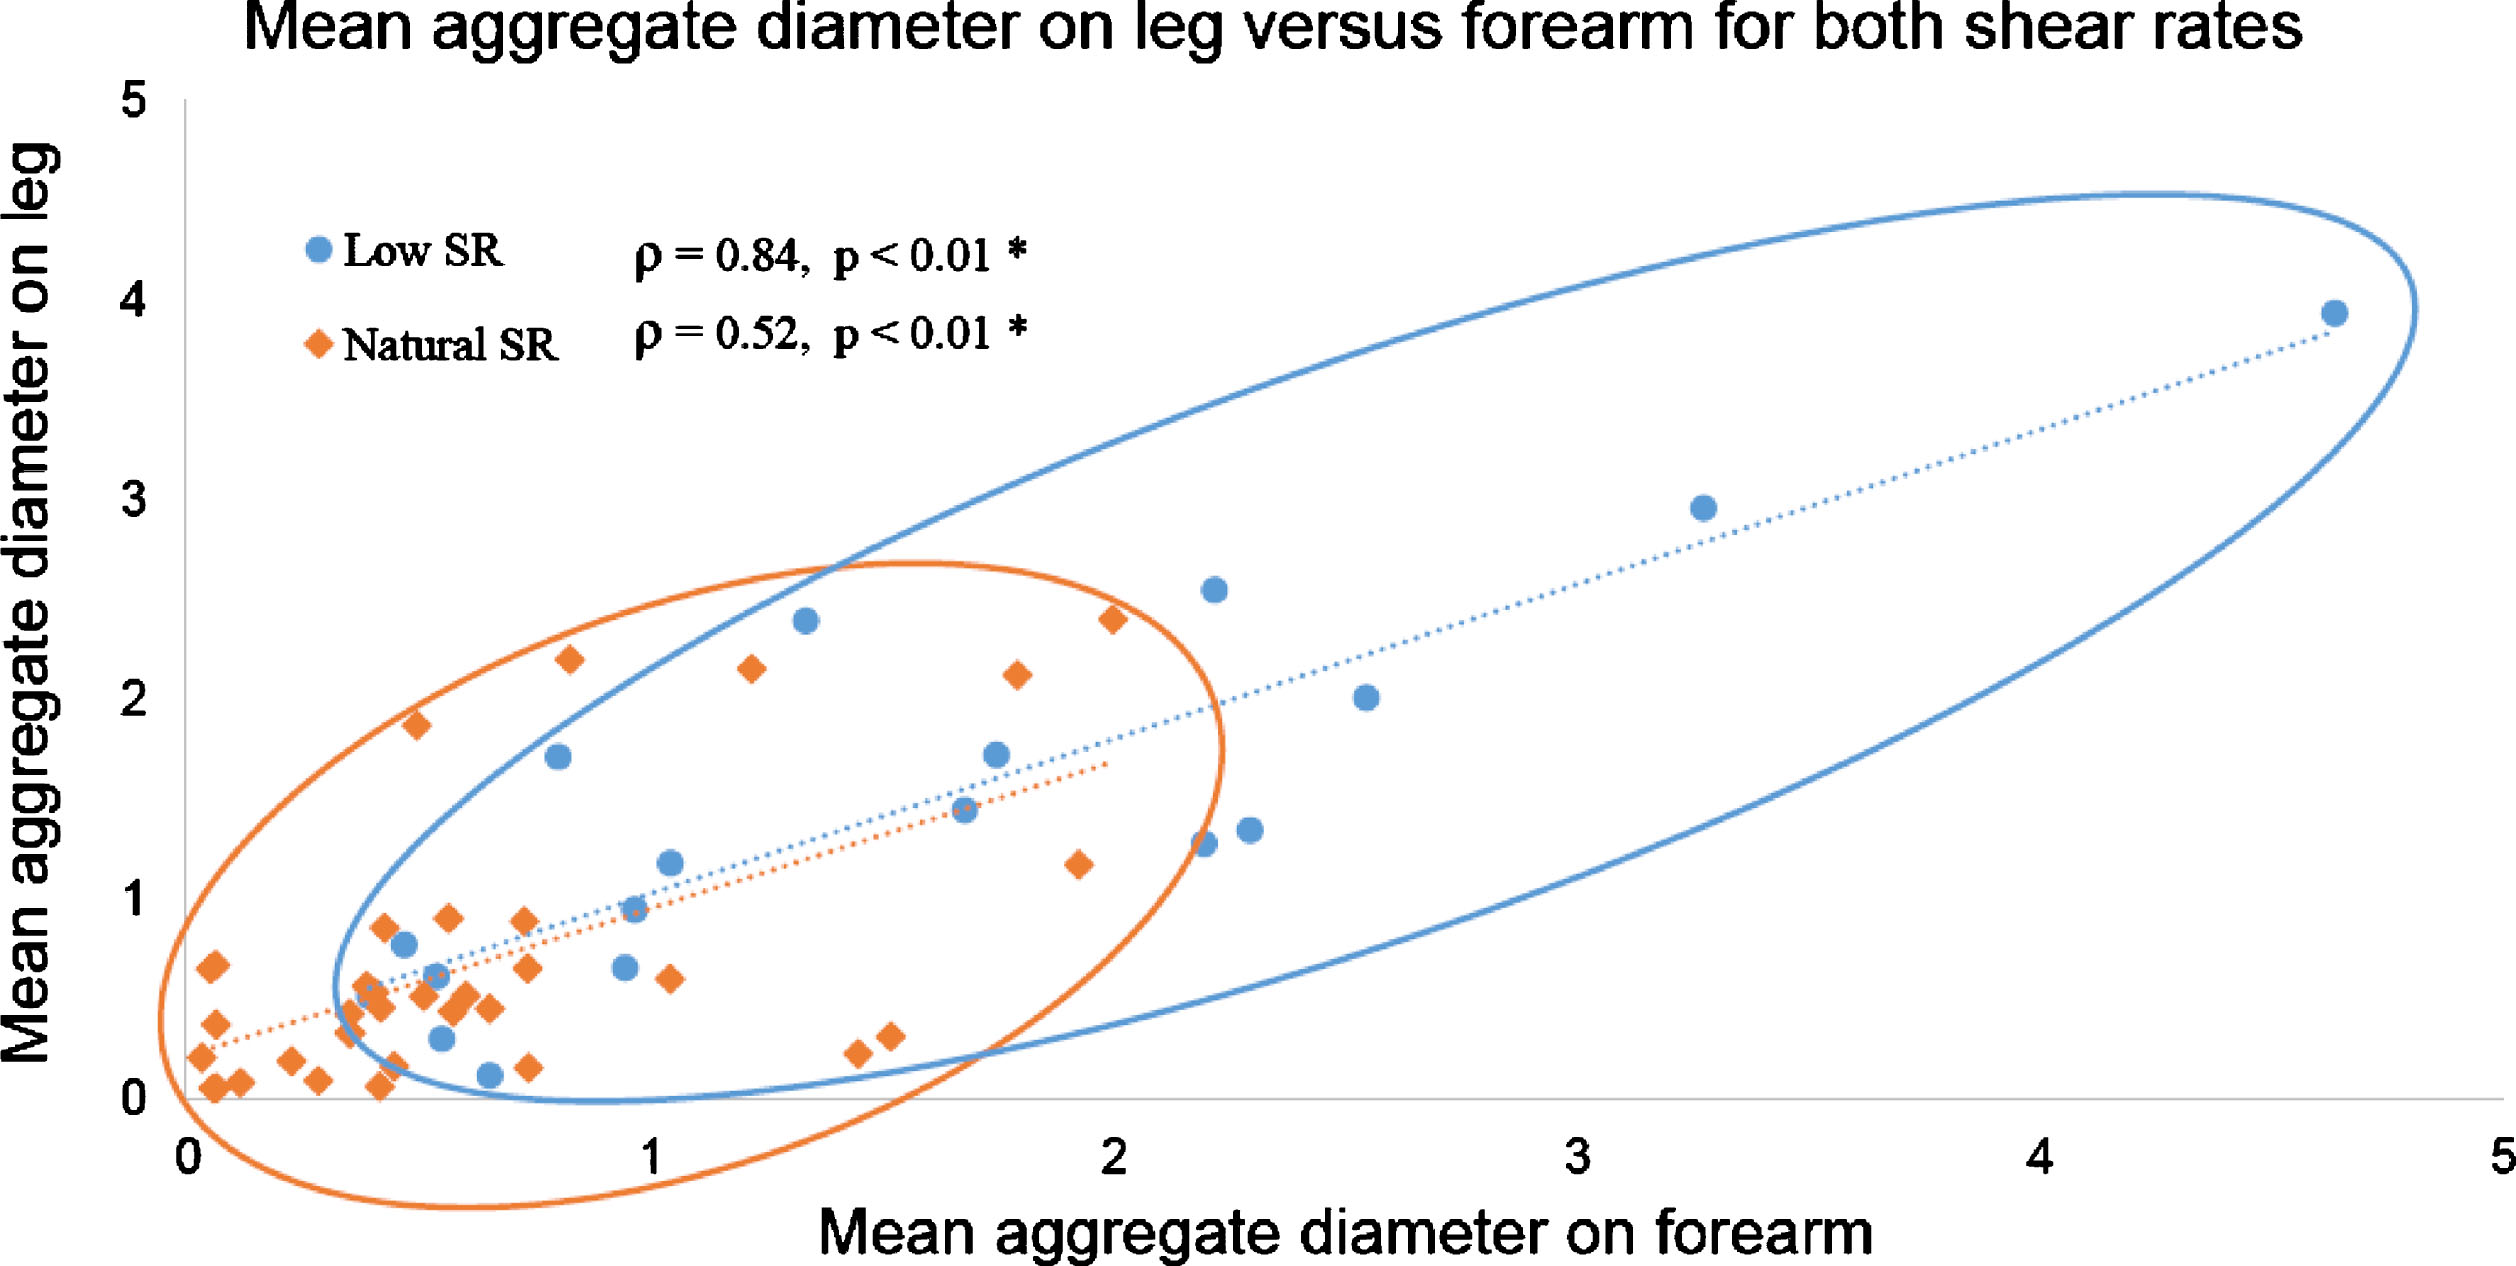 Aggregate diameter (D parameter) on the forearm and leg are proportional for measurements at low shear (blue) and natural shear rate (orange) conditions. SR: shear rate.